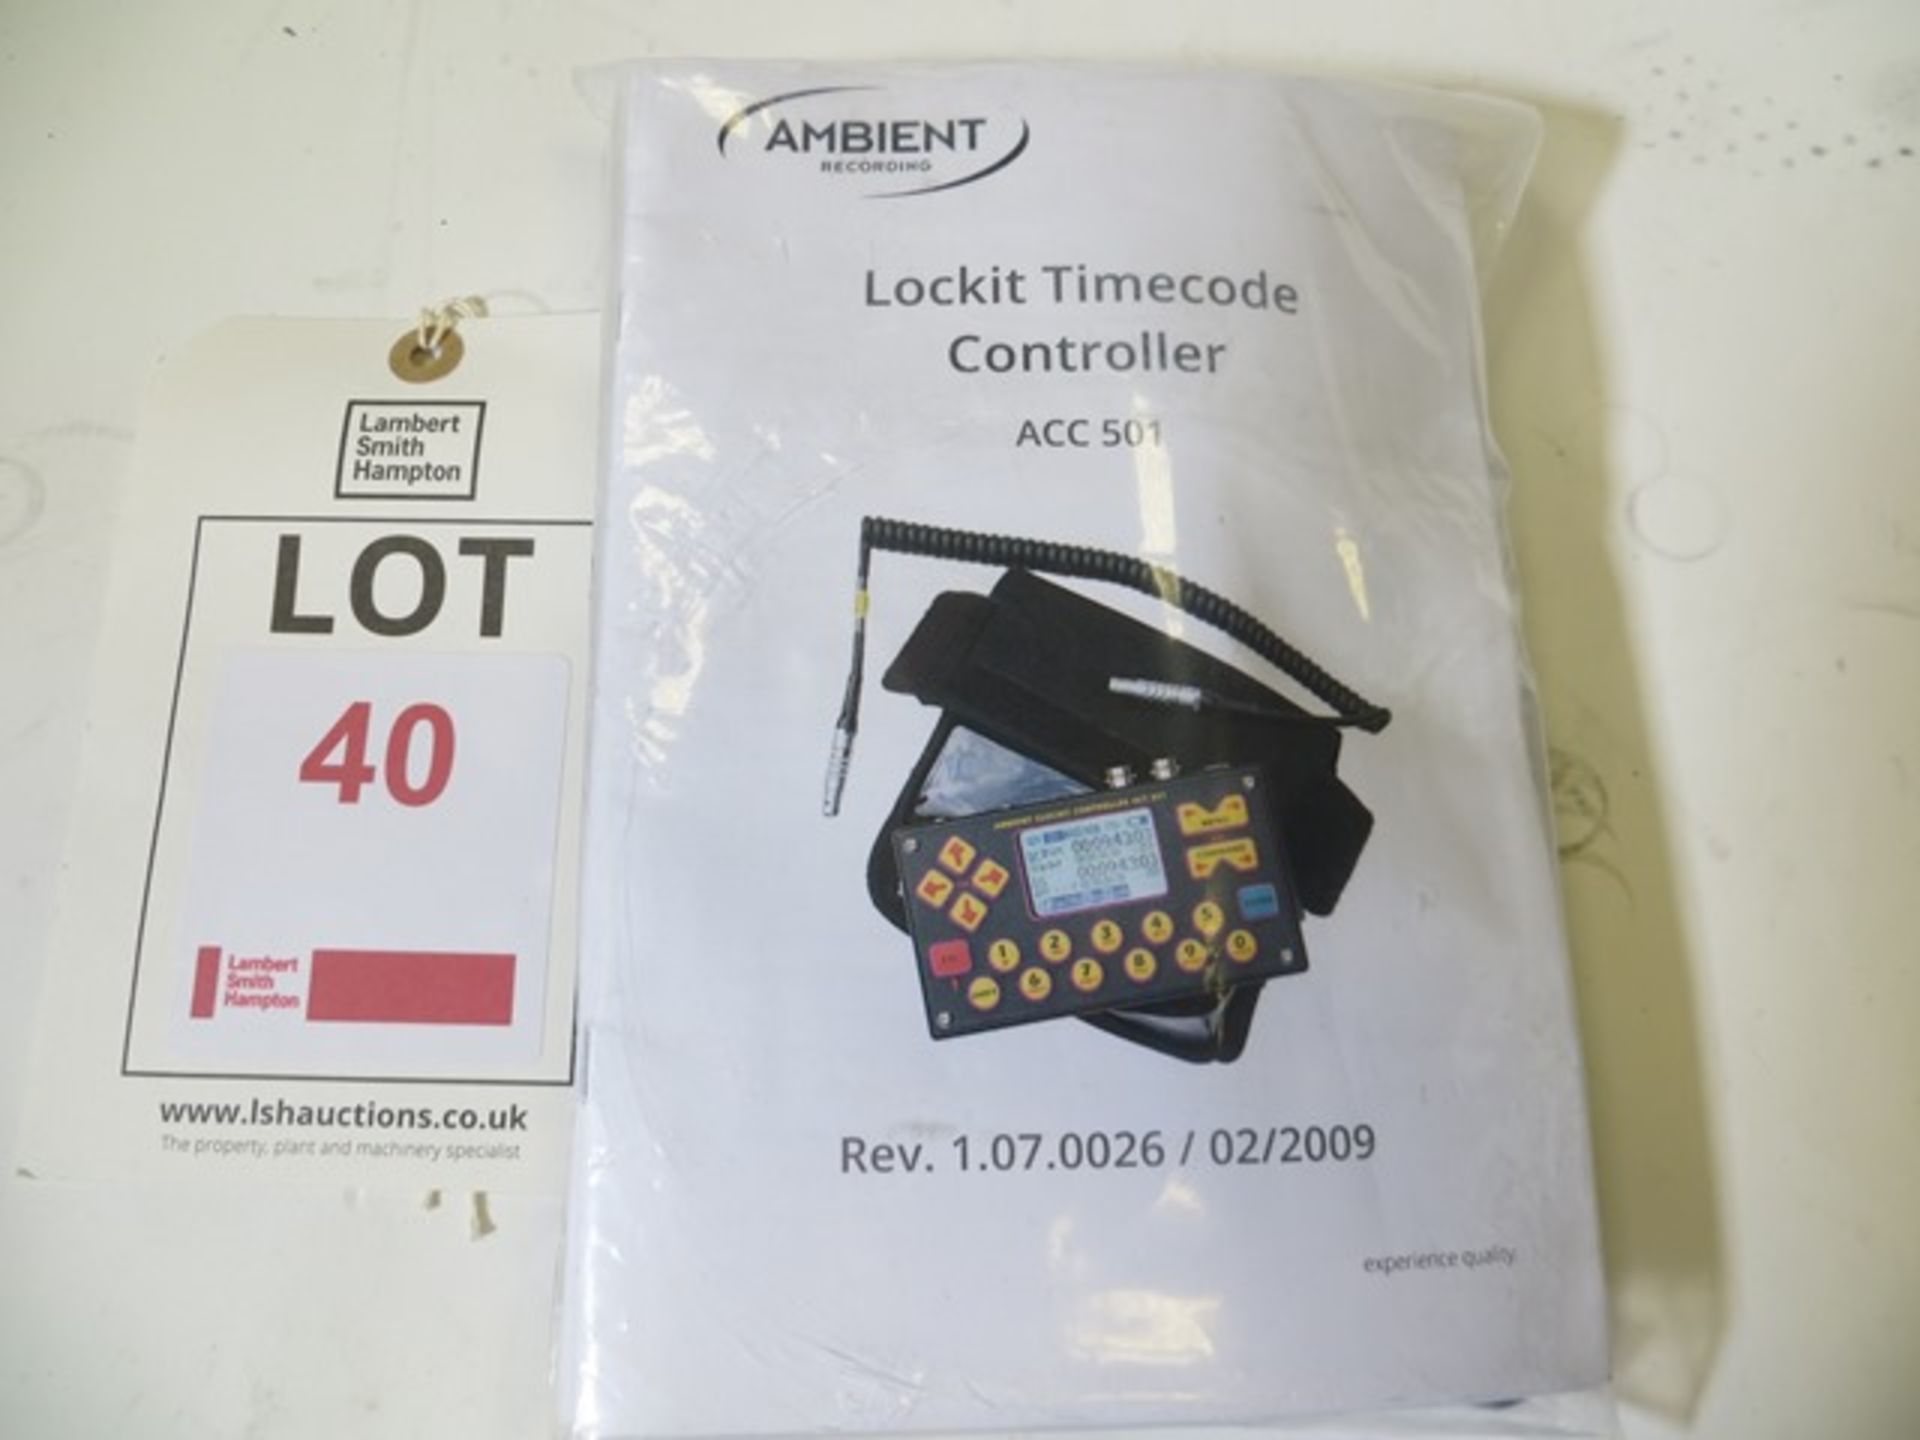 Ambient Lockit Timecode Controller Model ACC 501